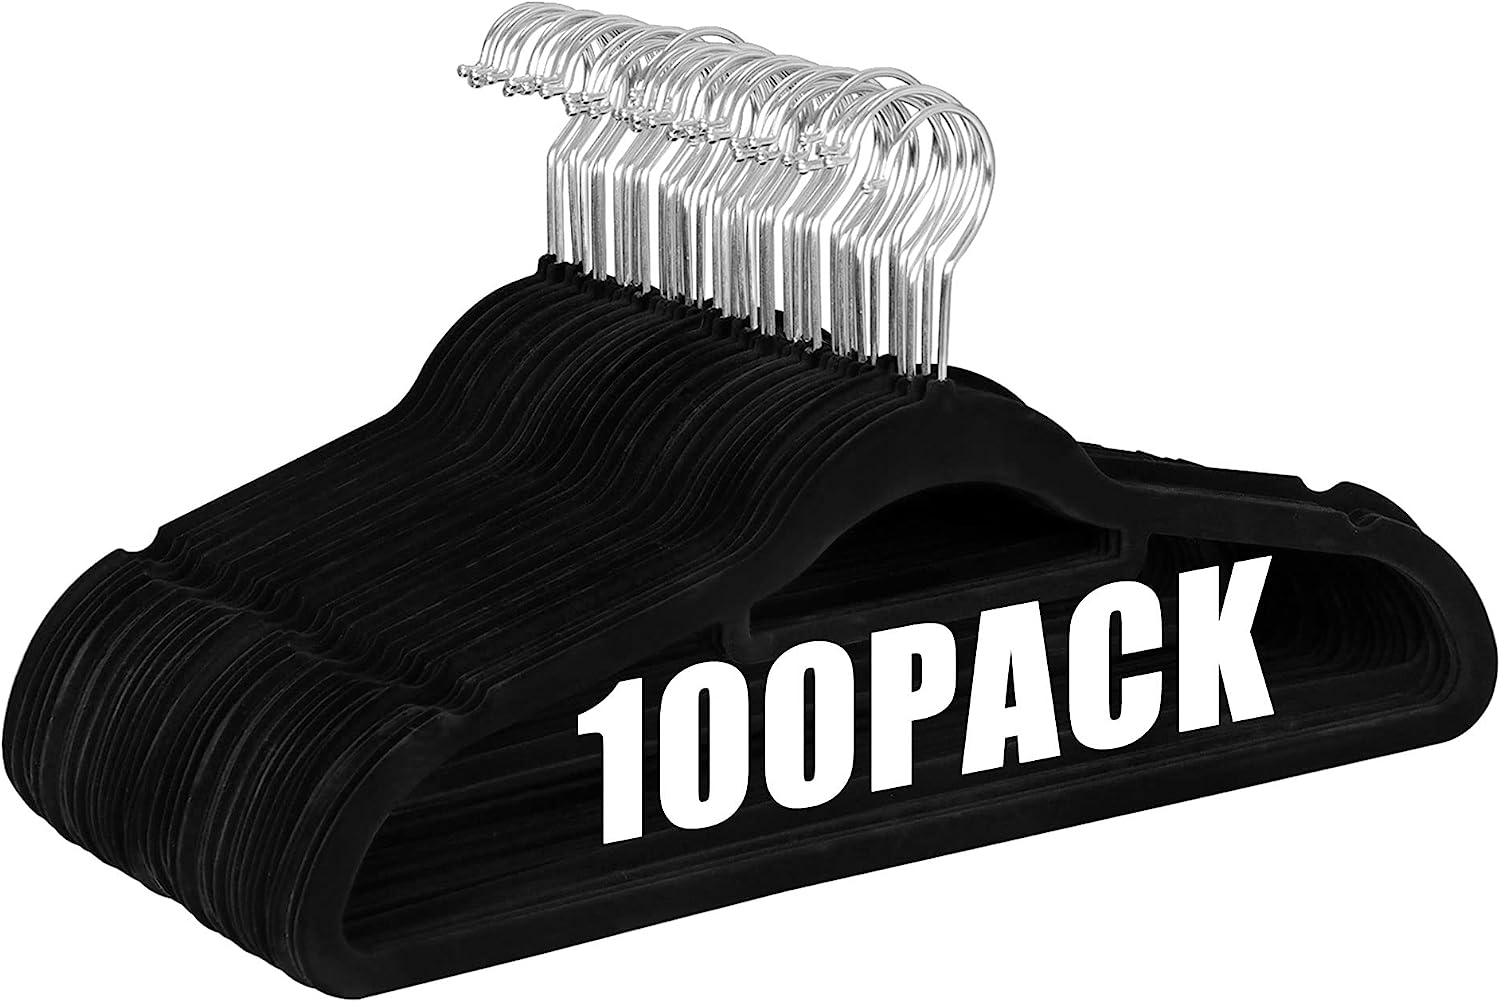 White 100 Pack, Plastic Notched Space Saving Tubular Standard Size Adult  Clothing Non-Slip Hangers Ideal for Everyday Use Dress, Pants and Coats etc  